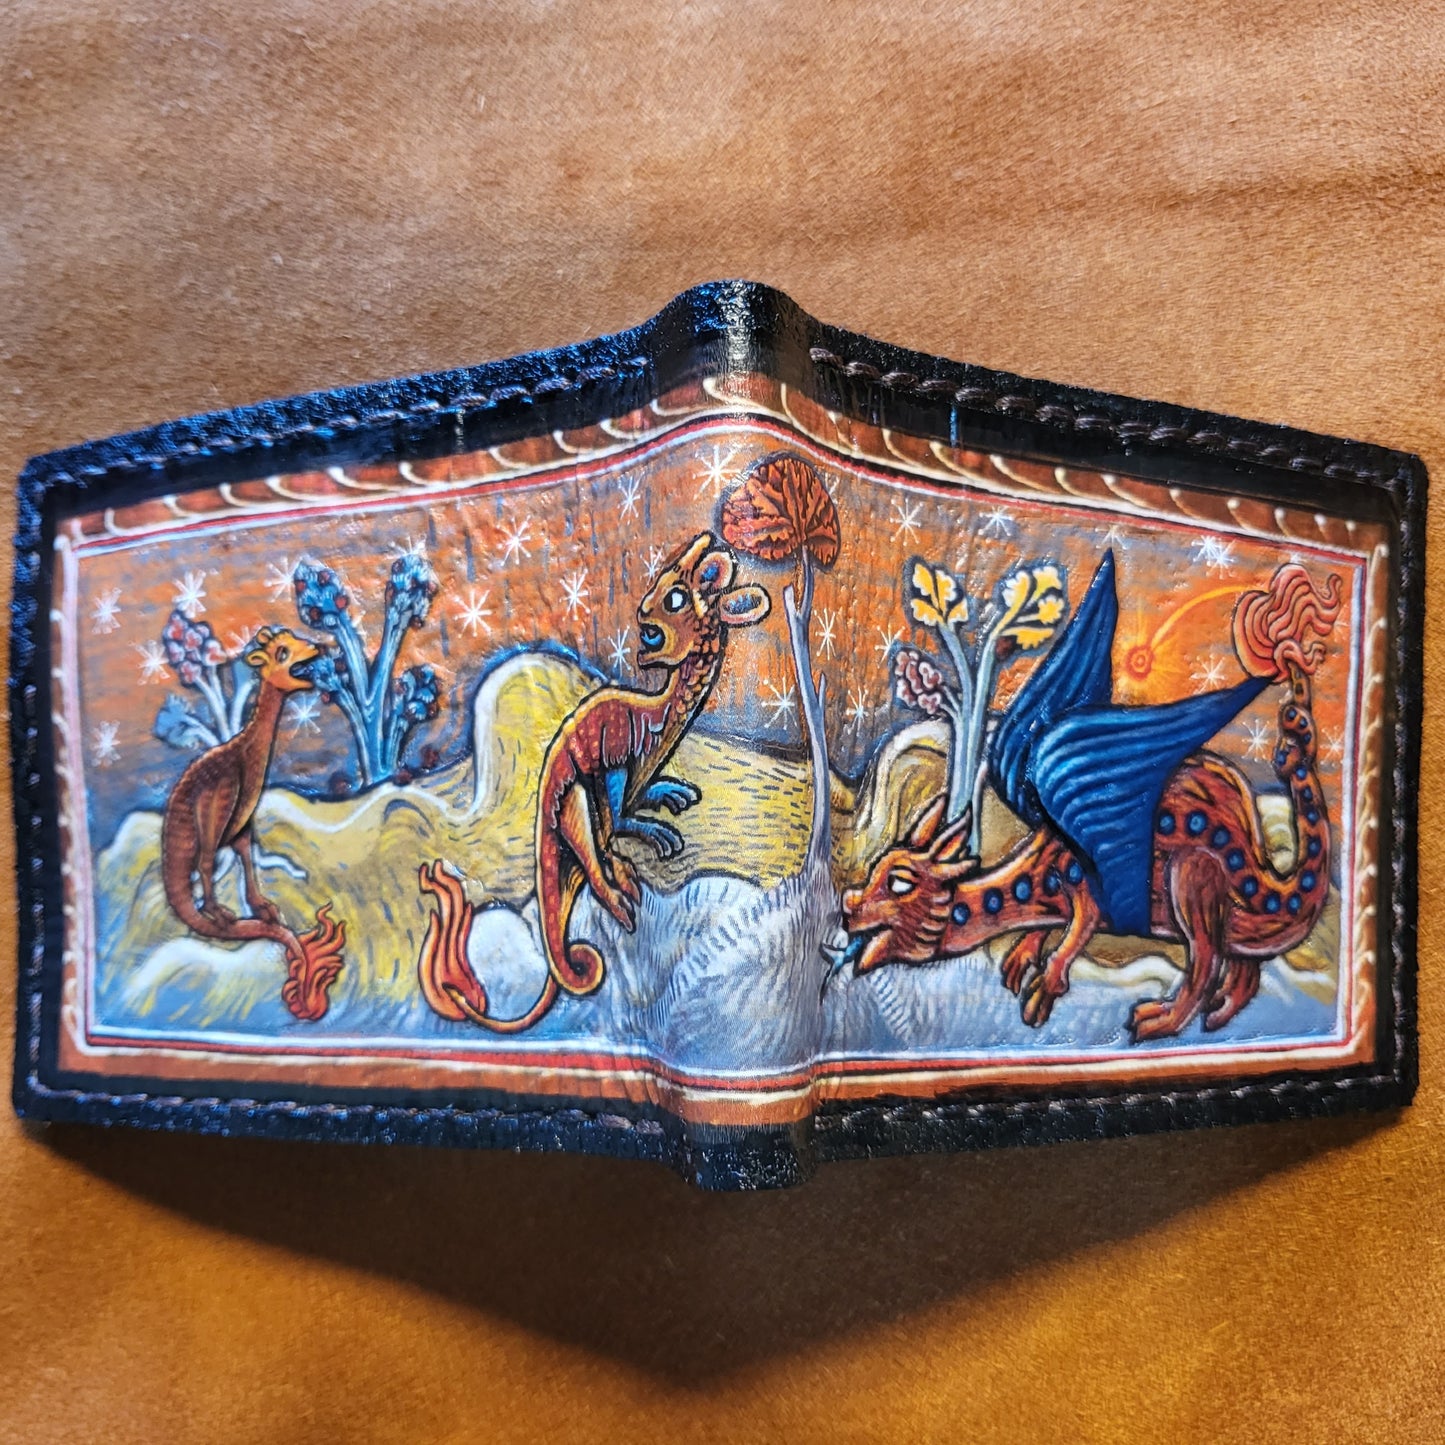 Medieval manuscript pokealchemy -3D textured surface - Hand stamped -Charmander transmutations-evolutions  - Leather Wallet - Handcrafted